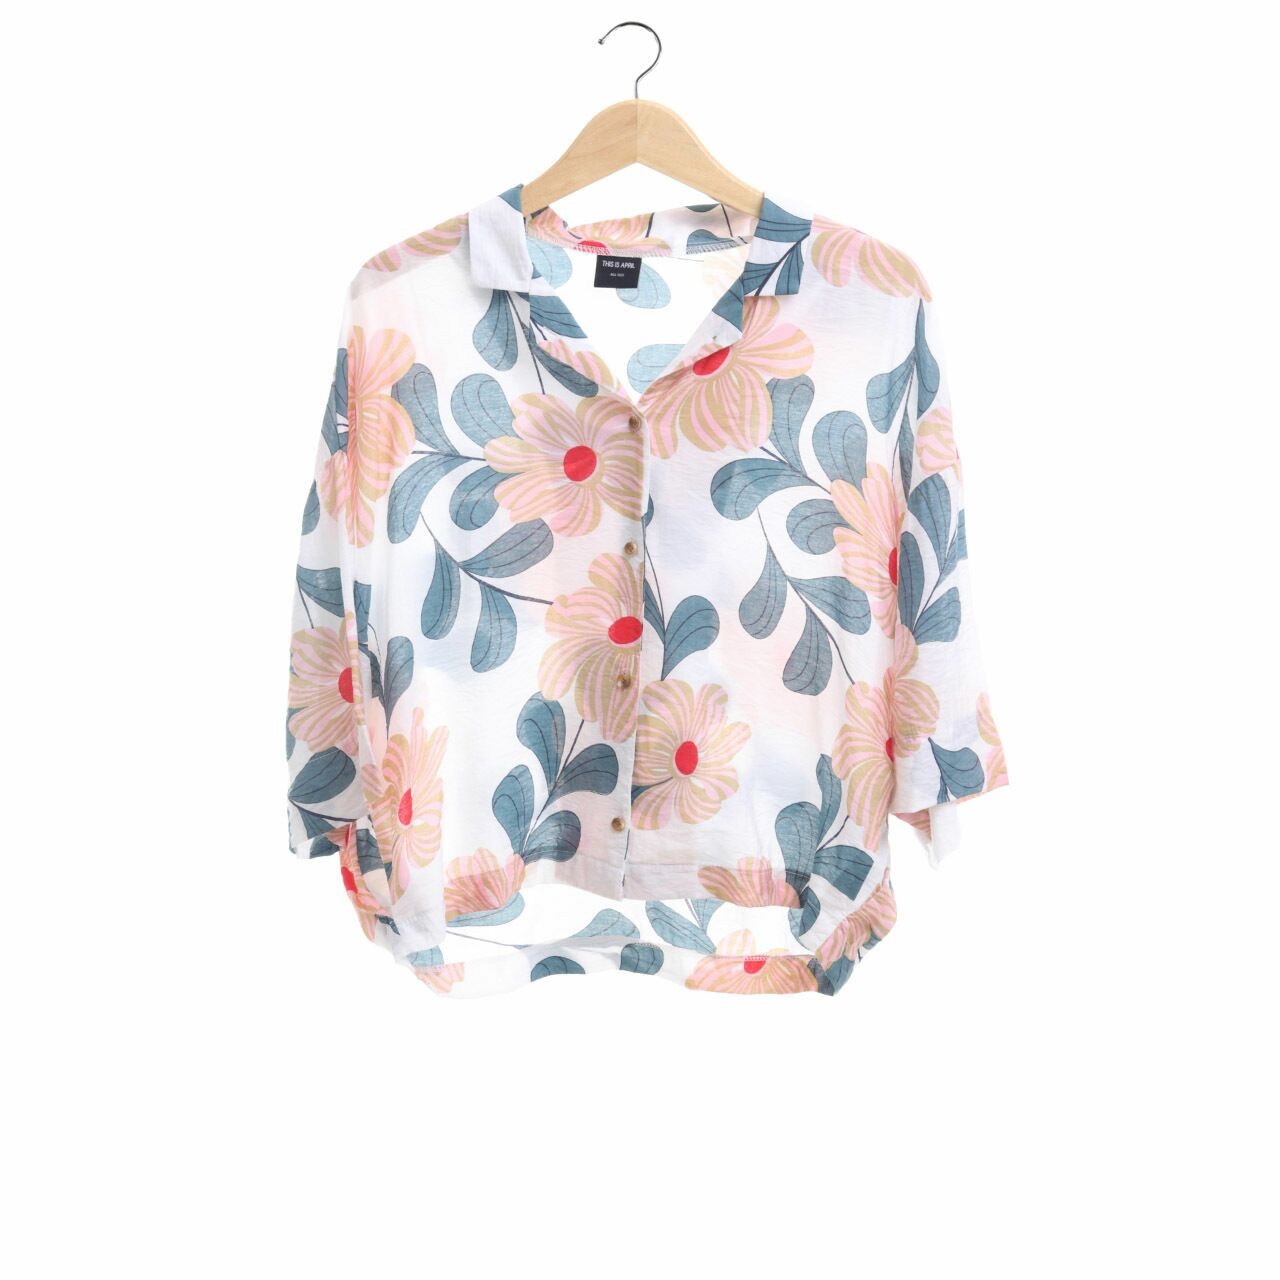 This is April White Floral Shirt